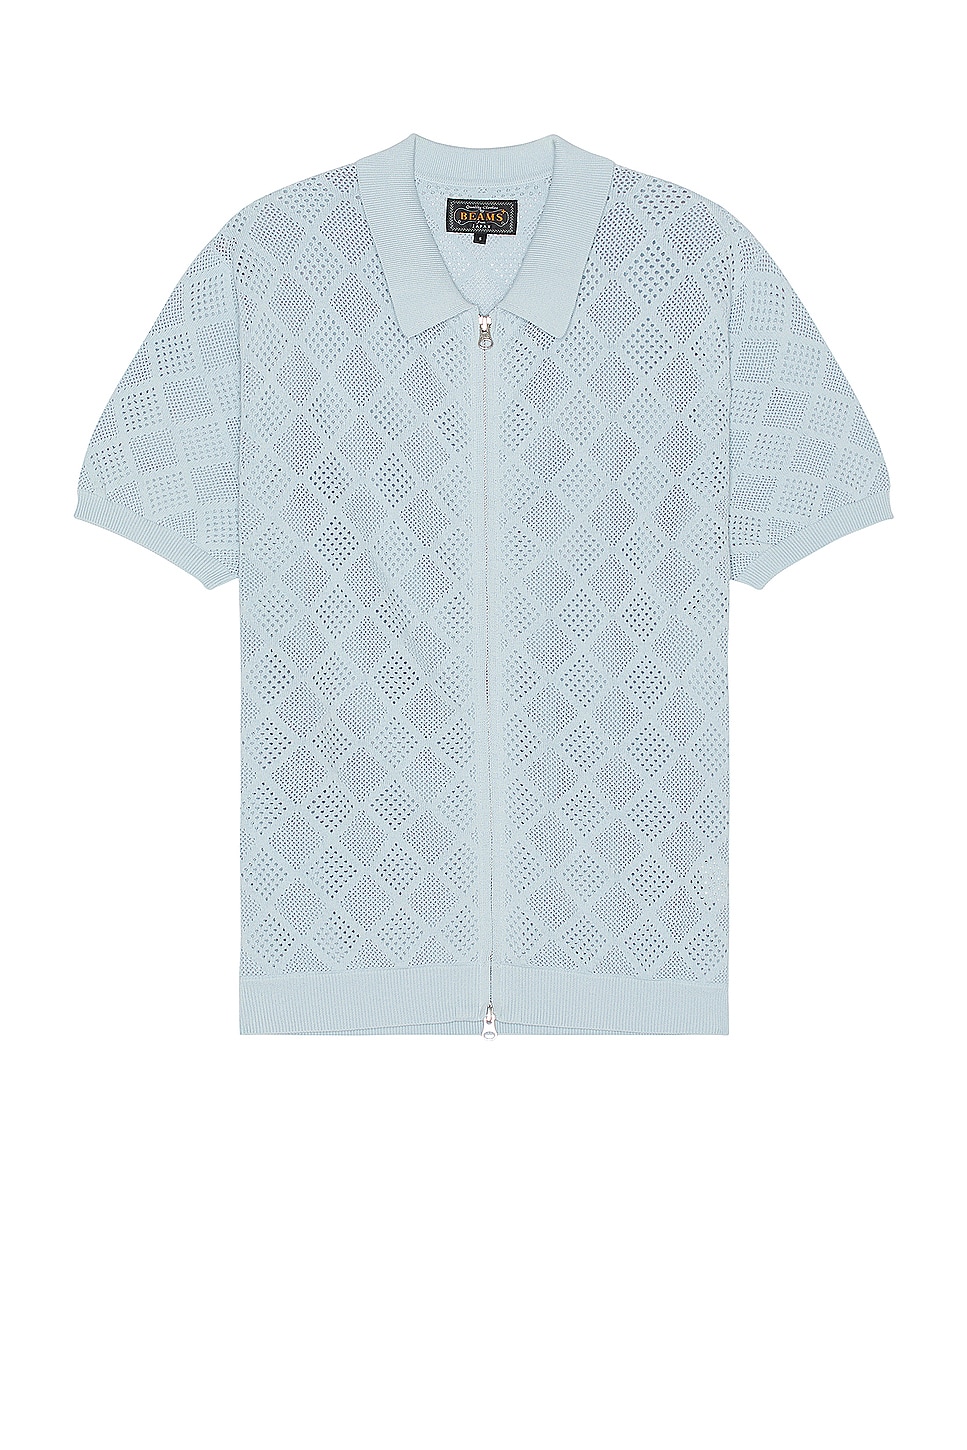 Image 1 of Beams Plus Zip Knit Polo Mesh in Sax